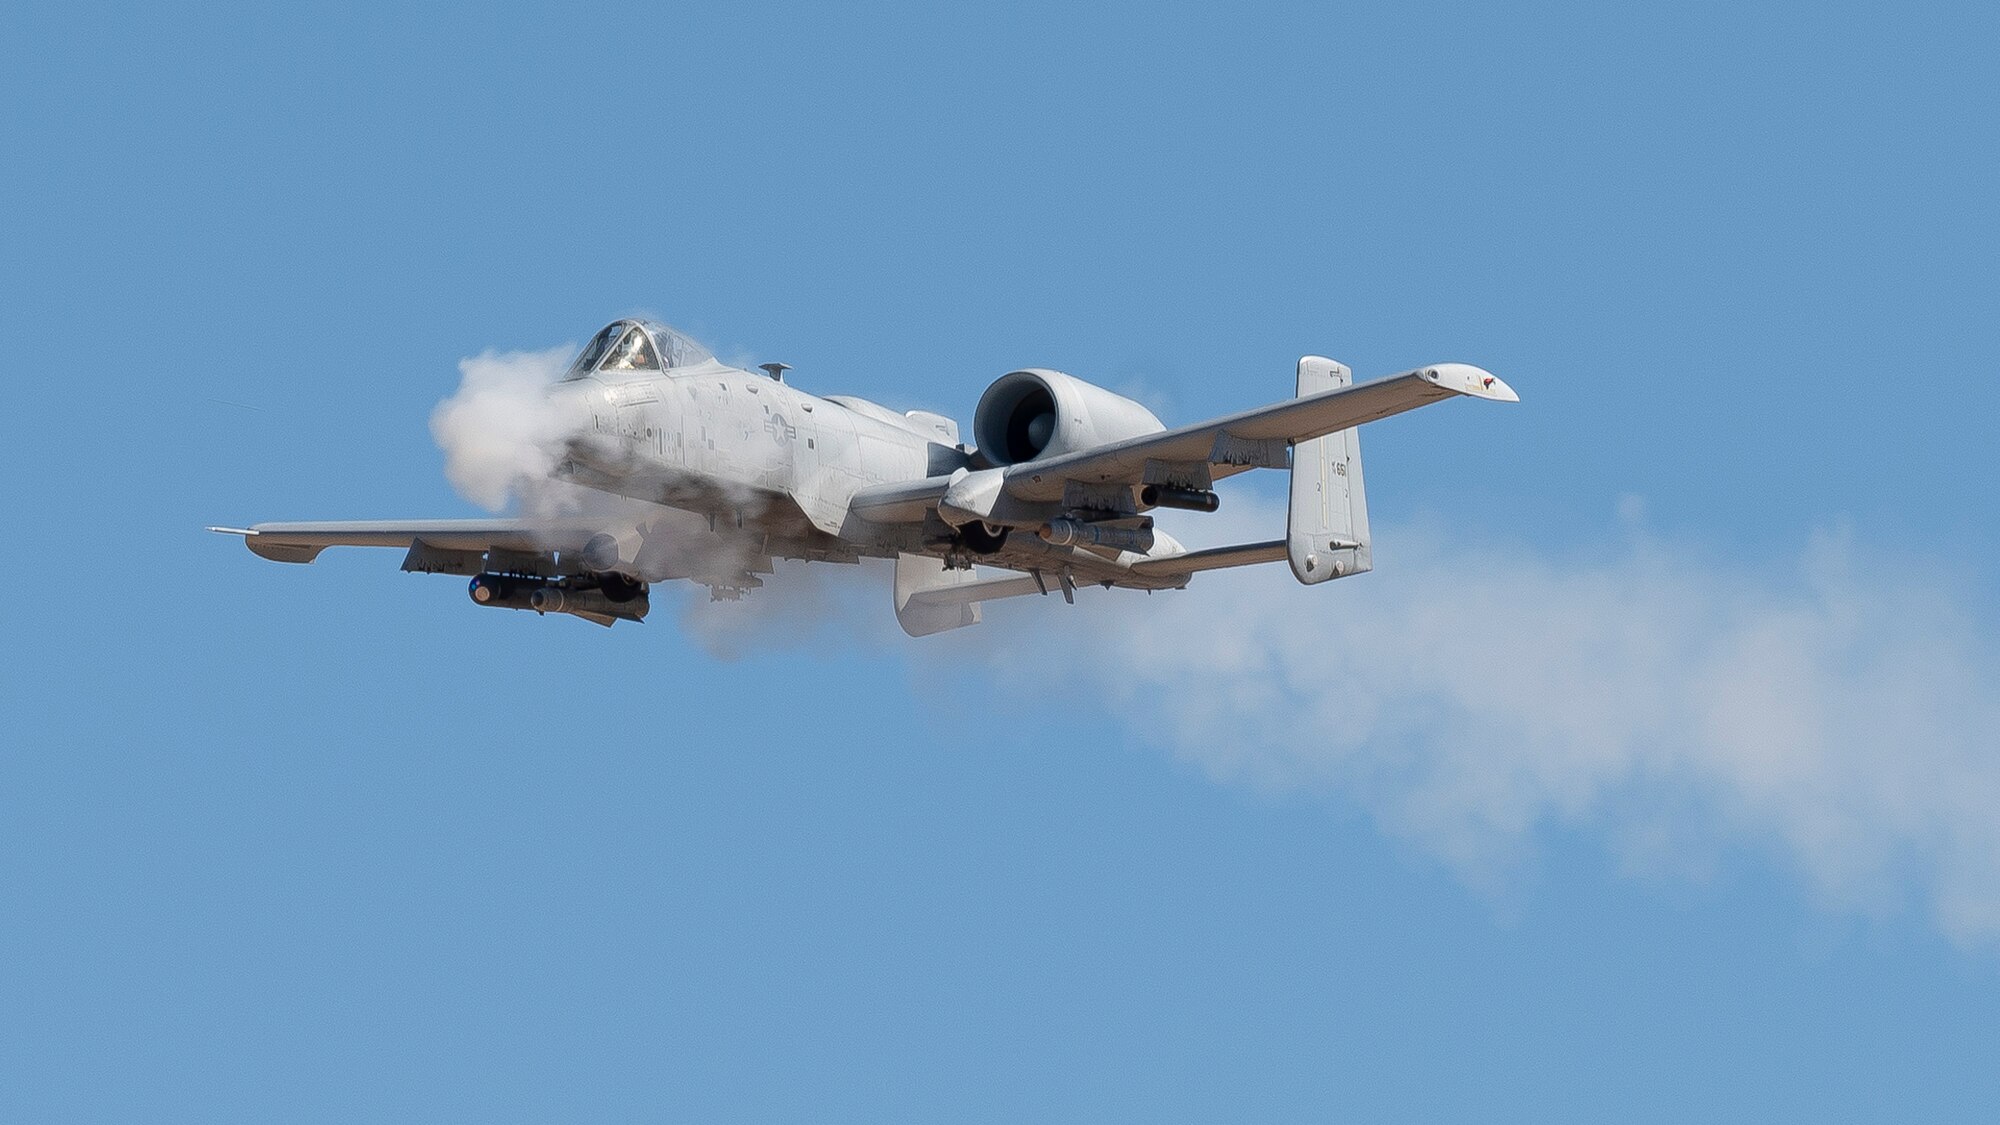 Pictured above is an aircraft firing its gun while airborne.